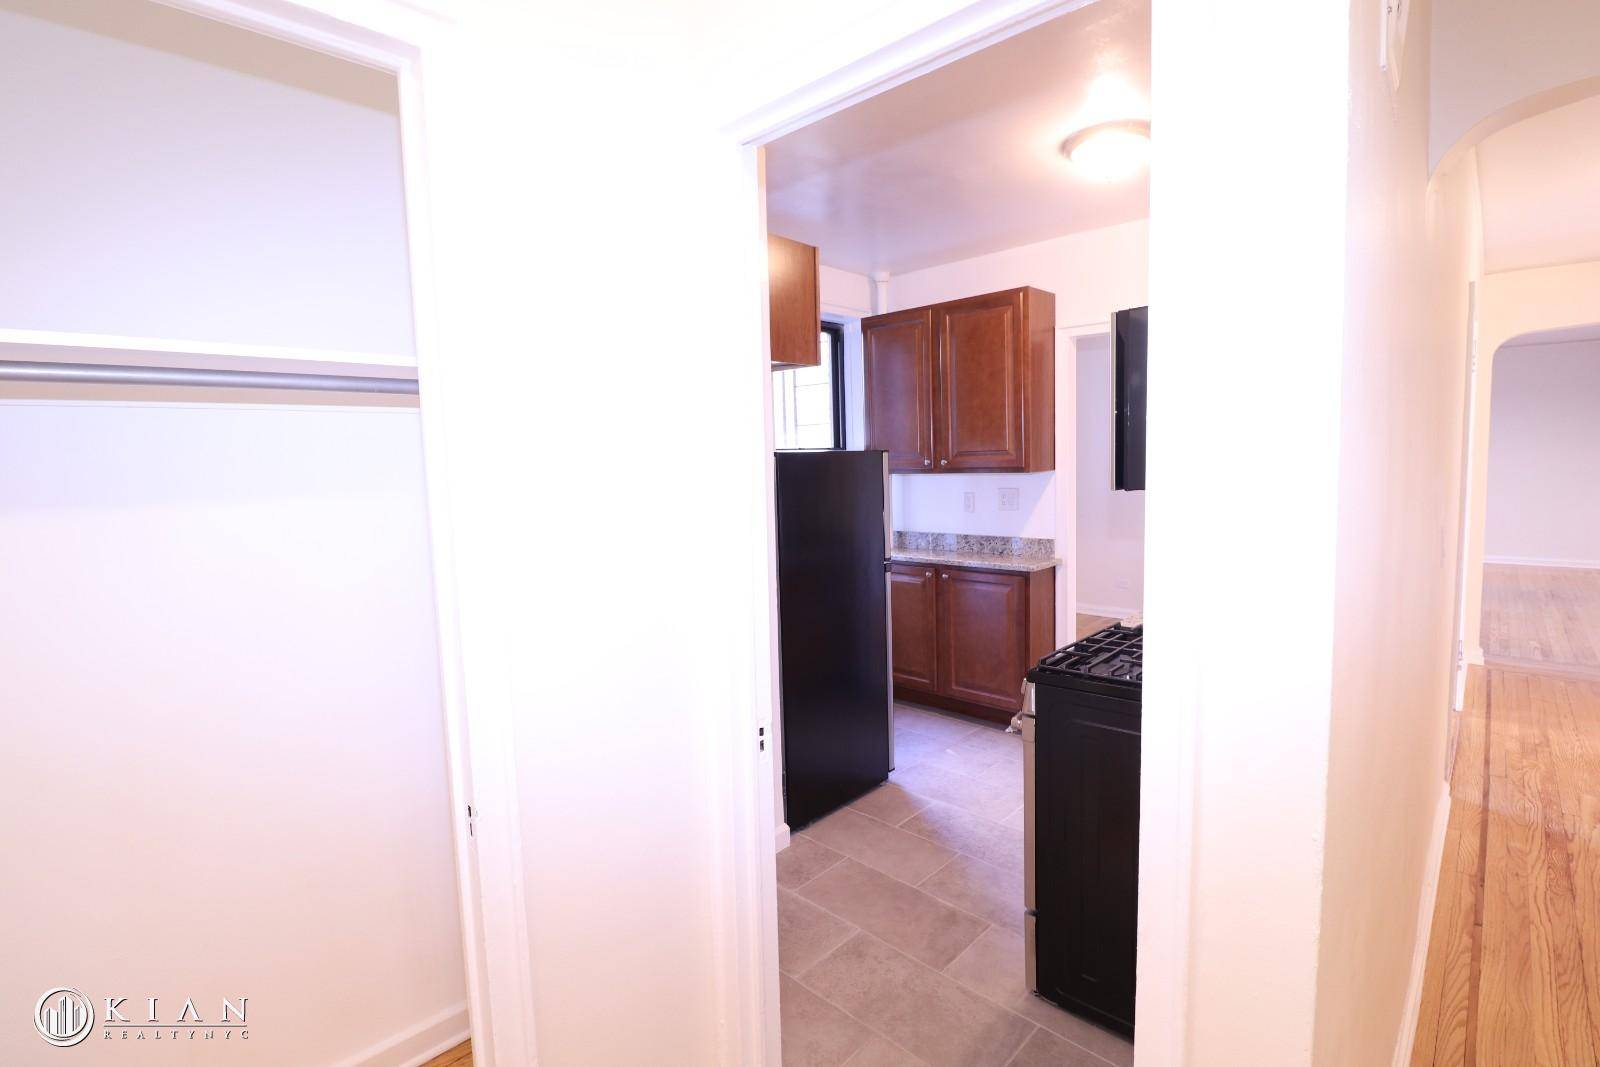 NO BROKER FEEVery spacious NEWLY RENOVATED 2 bedroom, 2 bathroom apartment located in very well maintain building with laundry inside of the building and also with garage available.